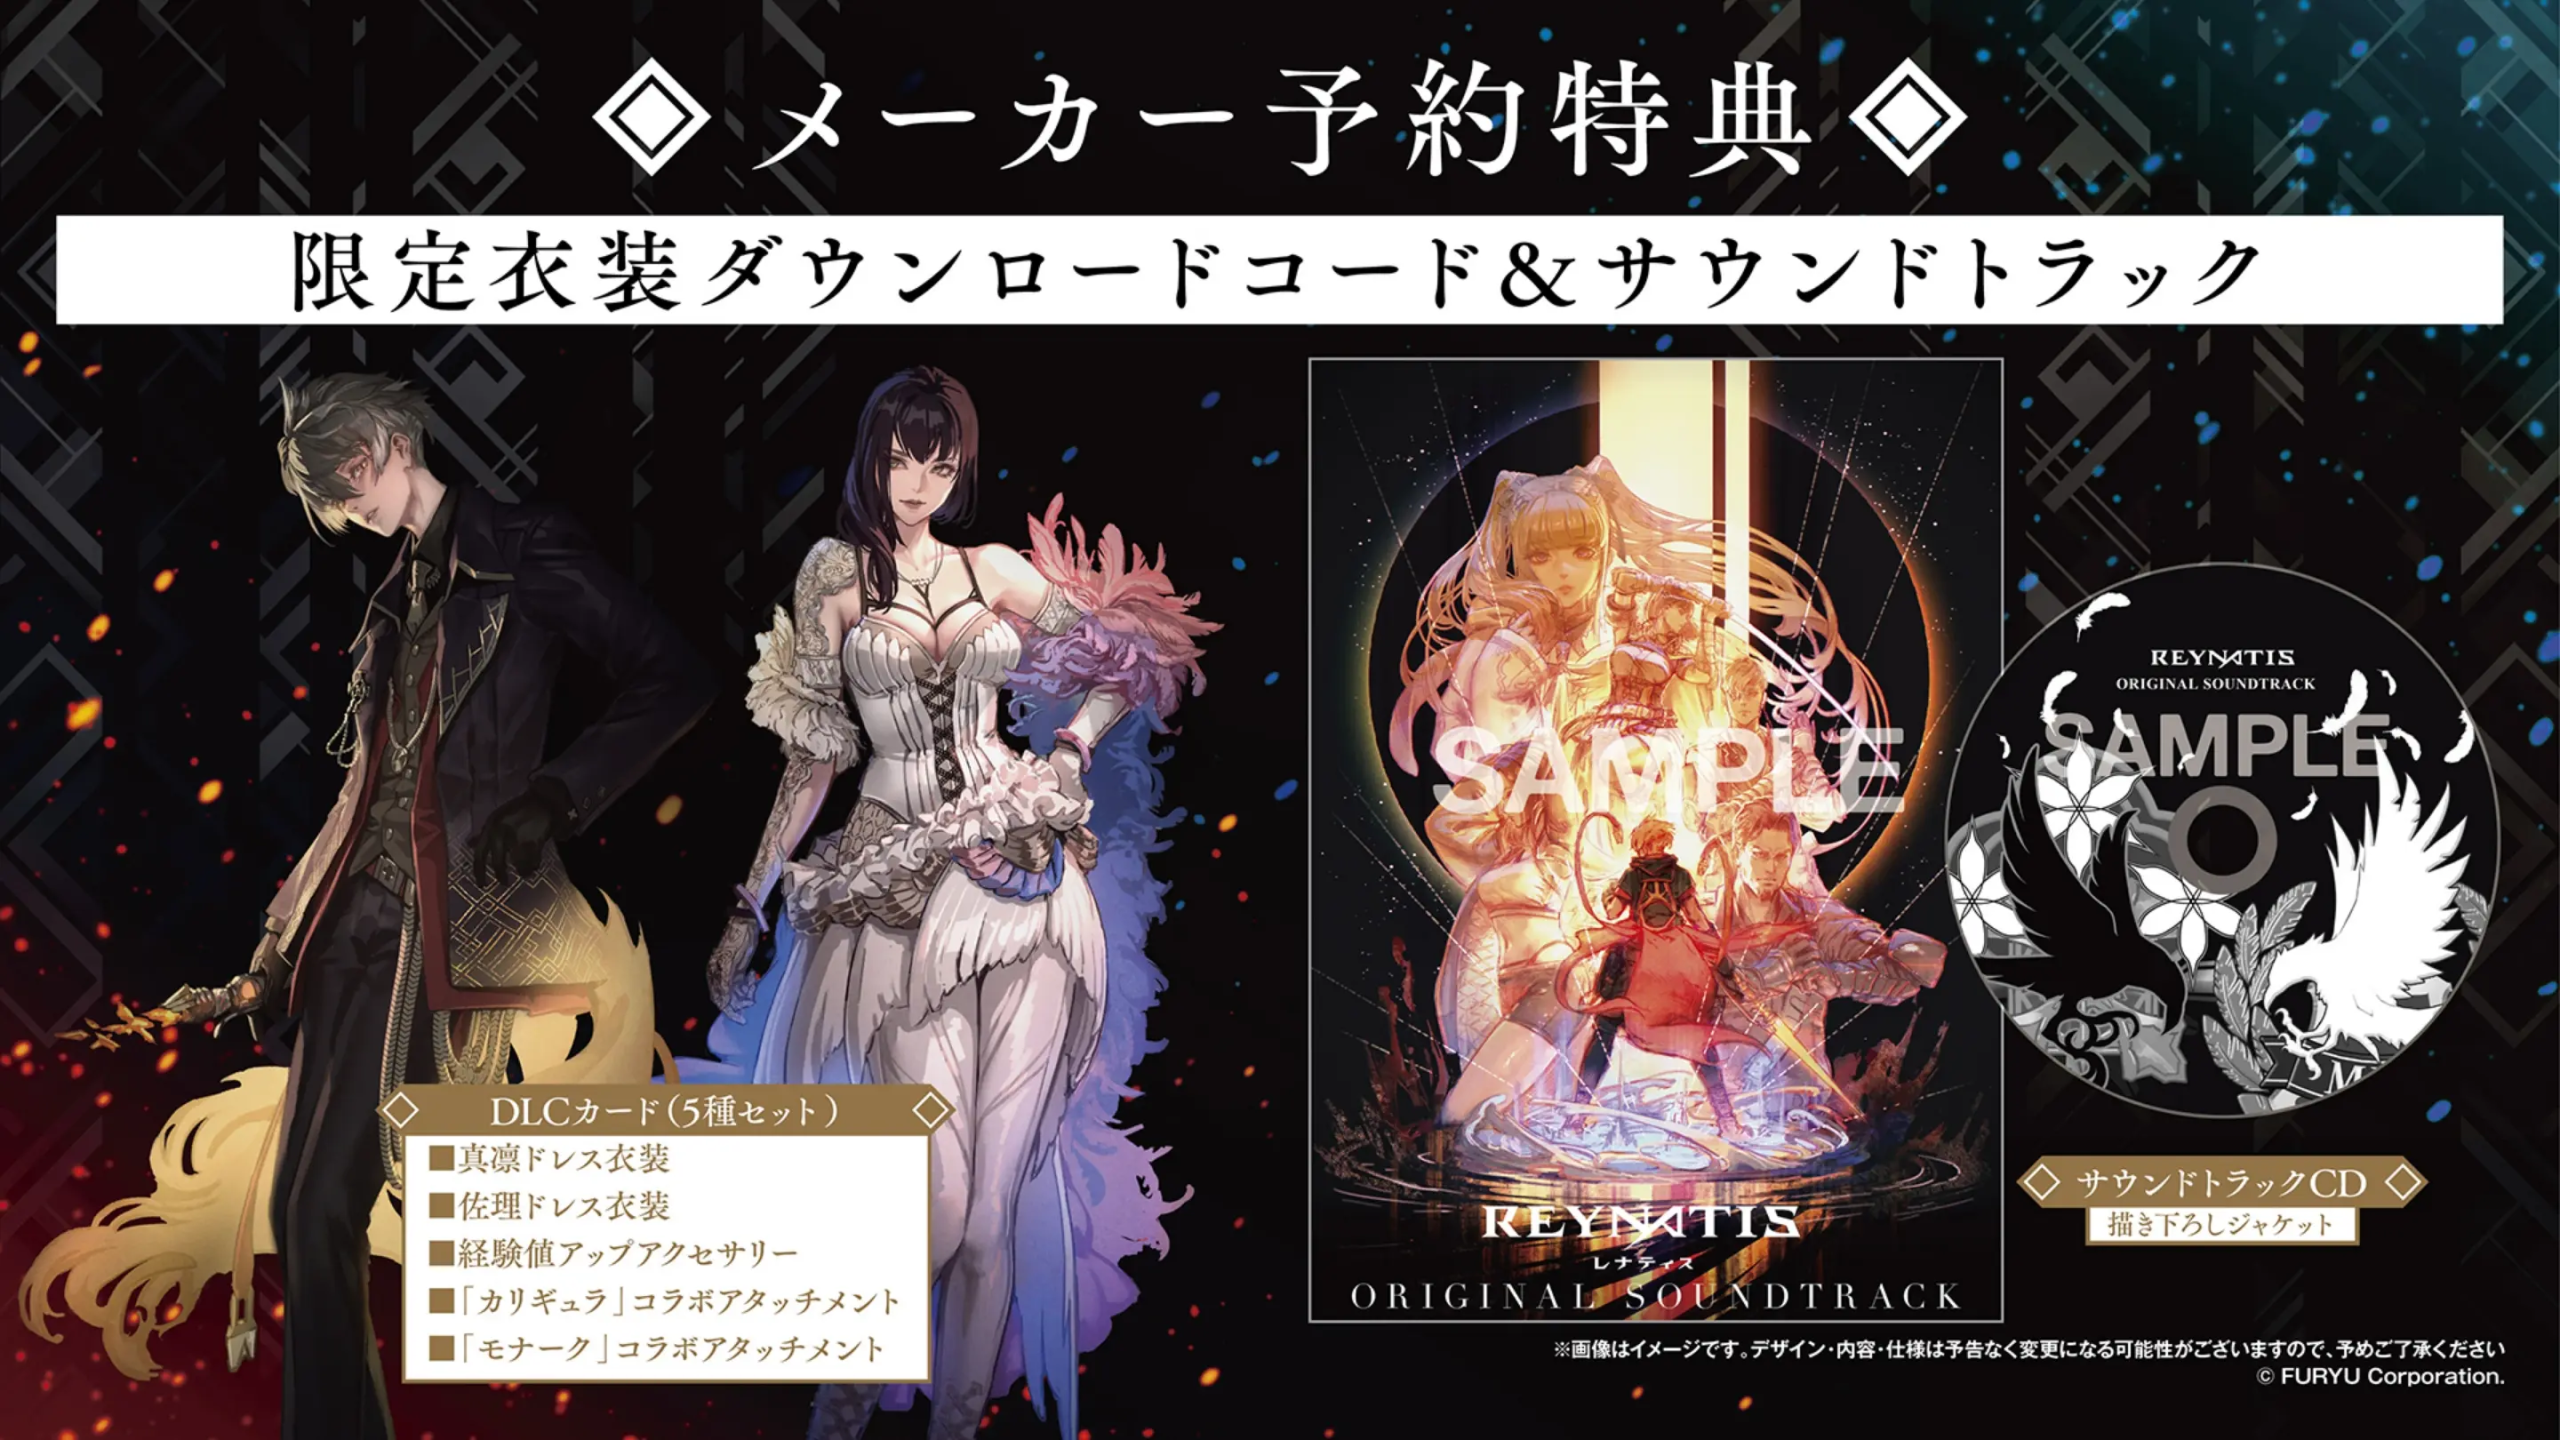 Reynatis Japan Purchase Bonuses Include Costumes for Marin and Sari